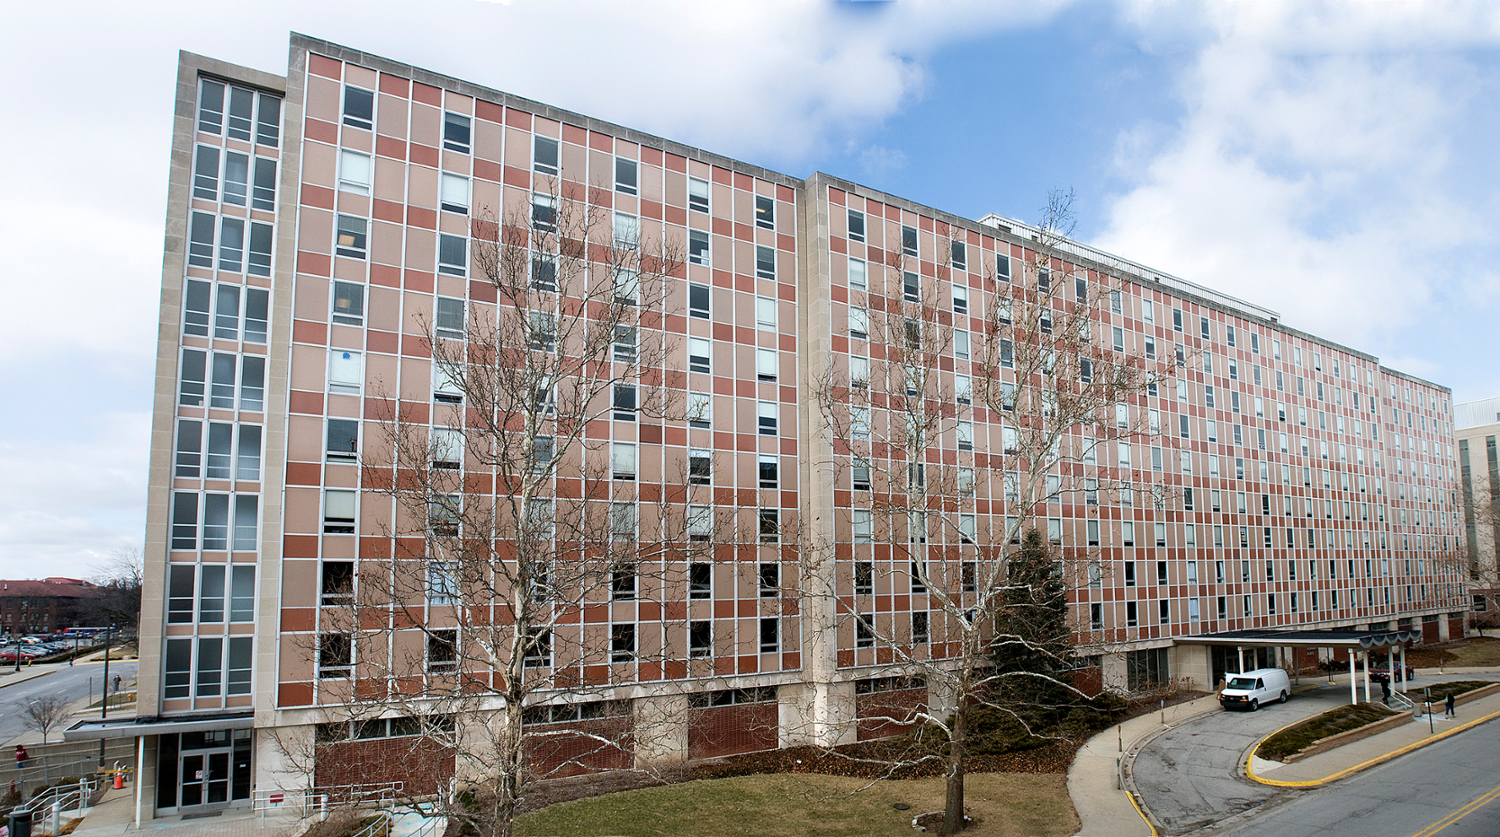 Pictured: Young Hall at Purdue University, which houses the Disability Resource Center on its 8th floor